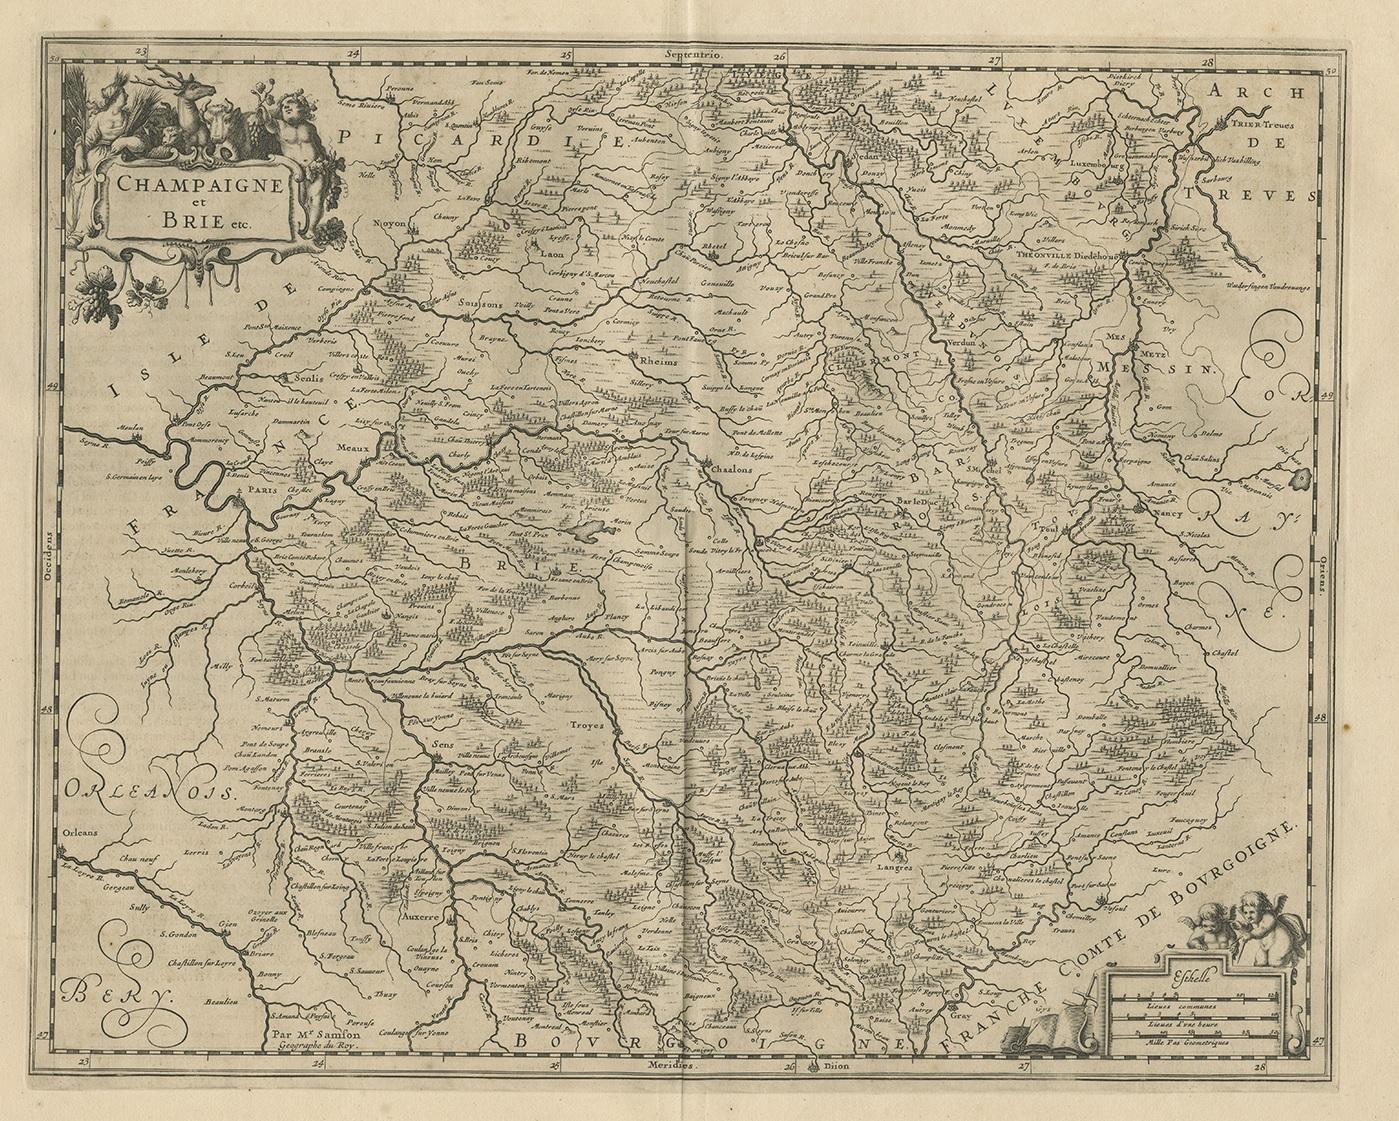 Antique map of France titled 'Champagne et Brie'. Detailed map of the region of Champagne and Brie. This map originates from 'Atlas Novus, Sive Theatrum Orbis Orbis Terrarum: In quo Galliae, Helvetiae (..)' by J. Janssonius (1656-1657).